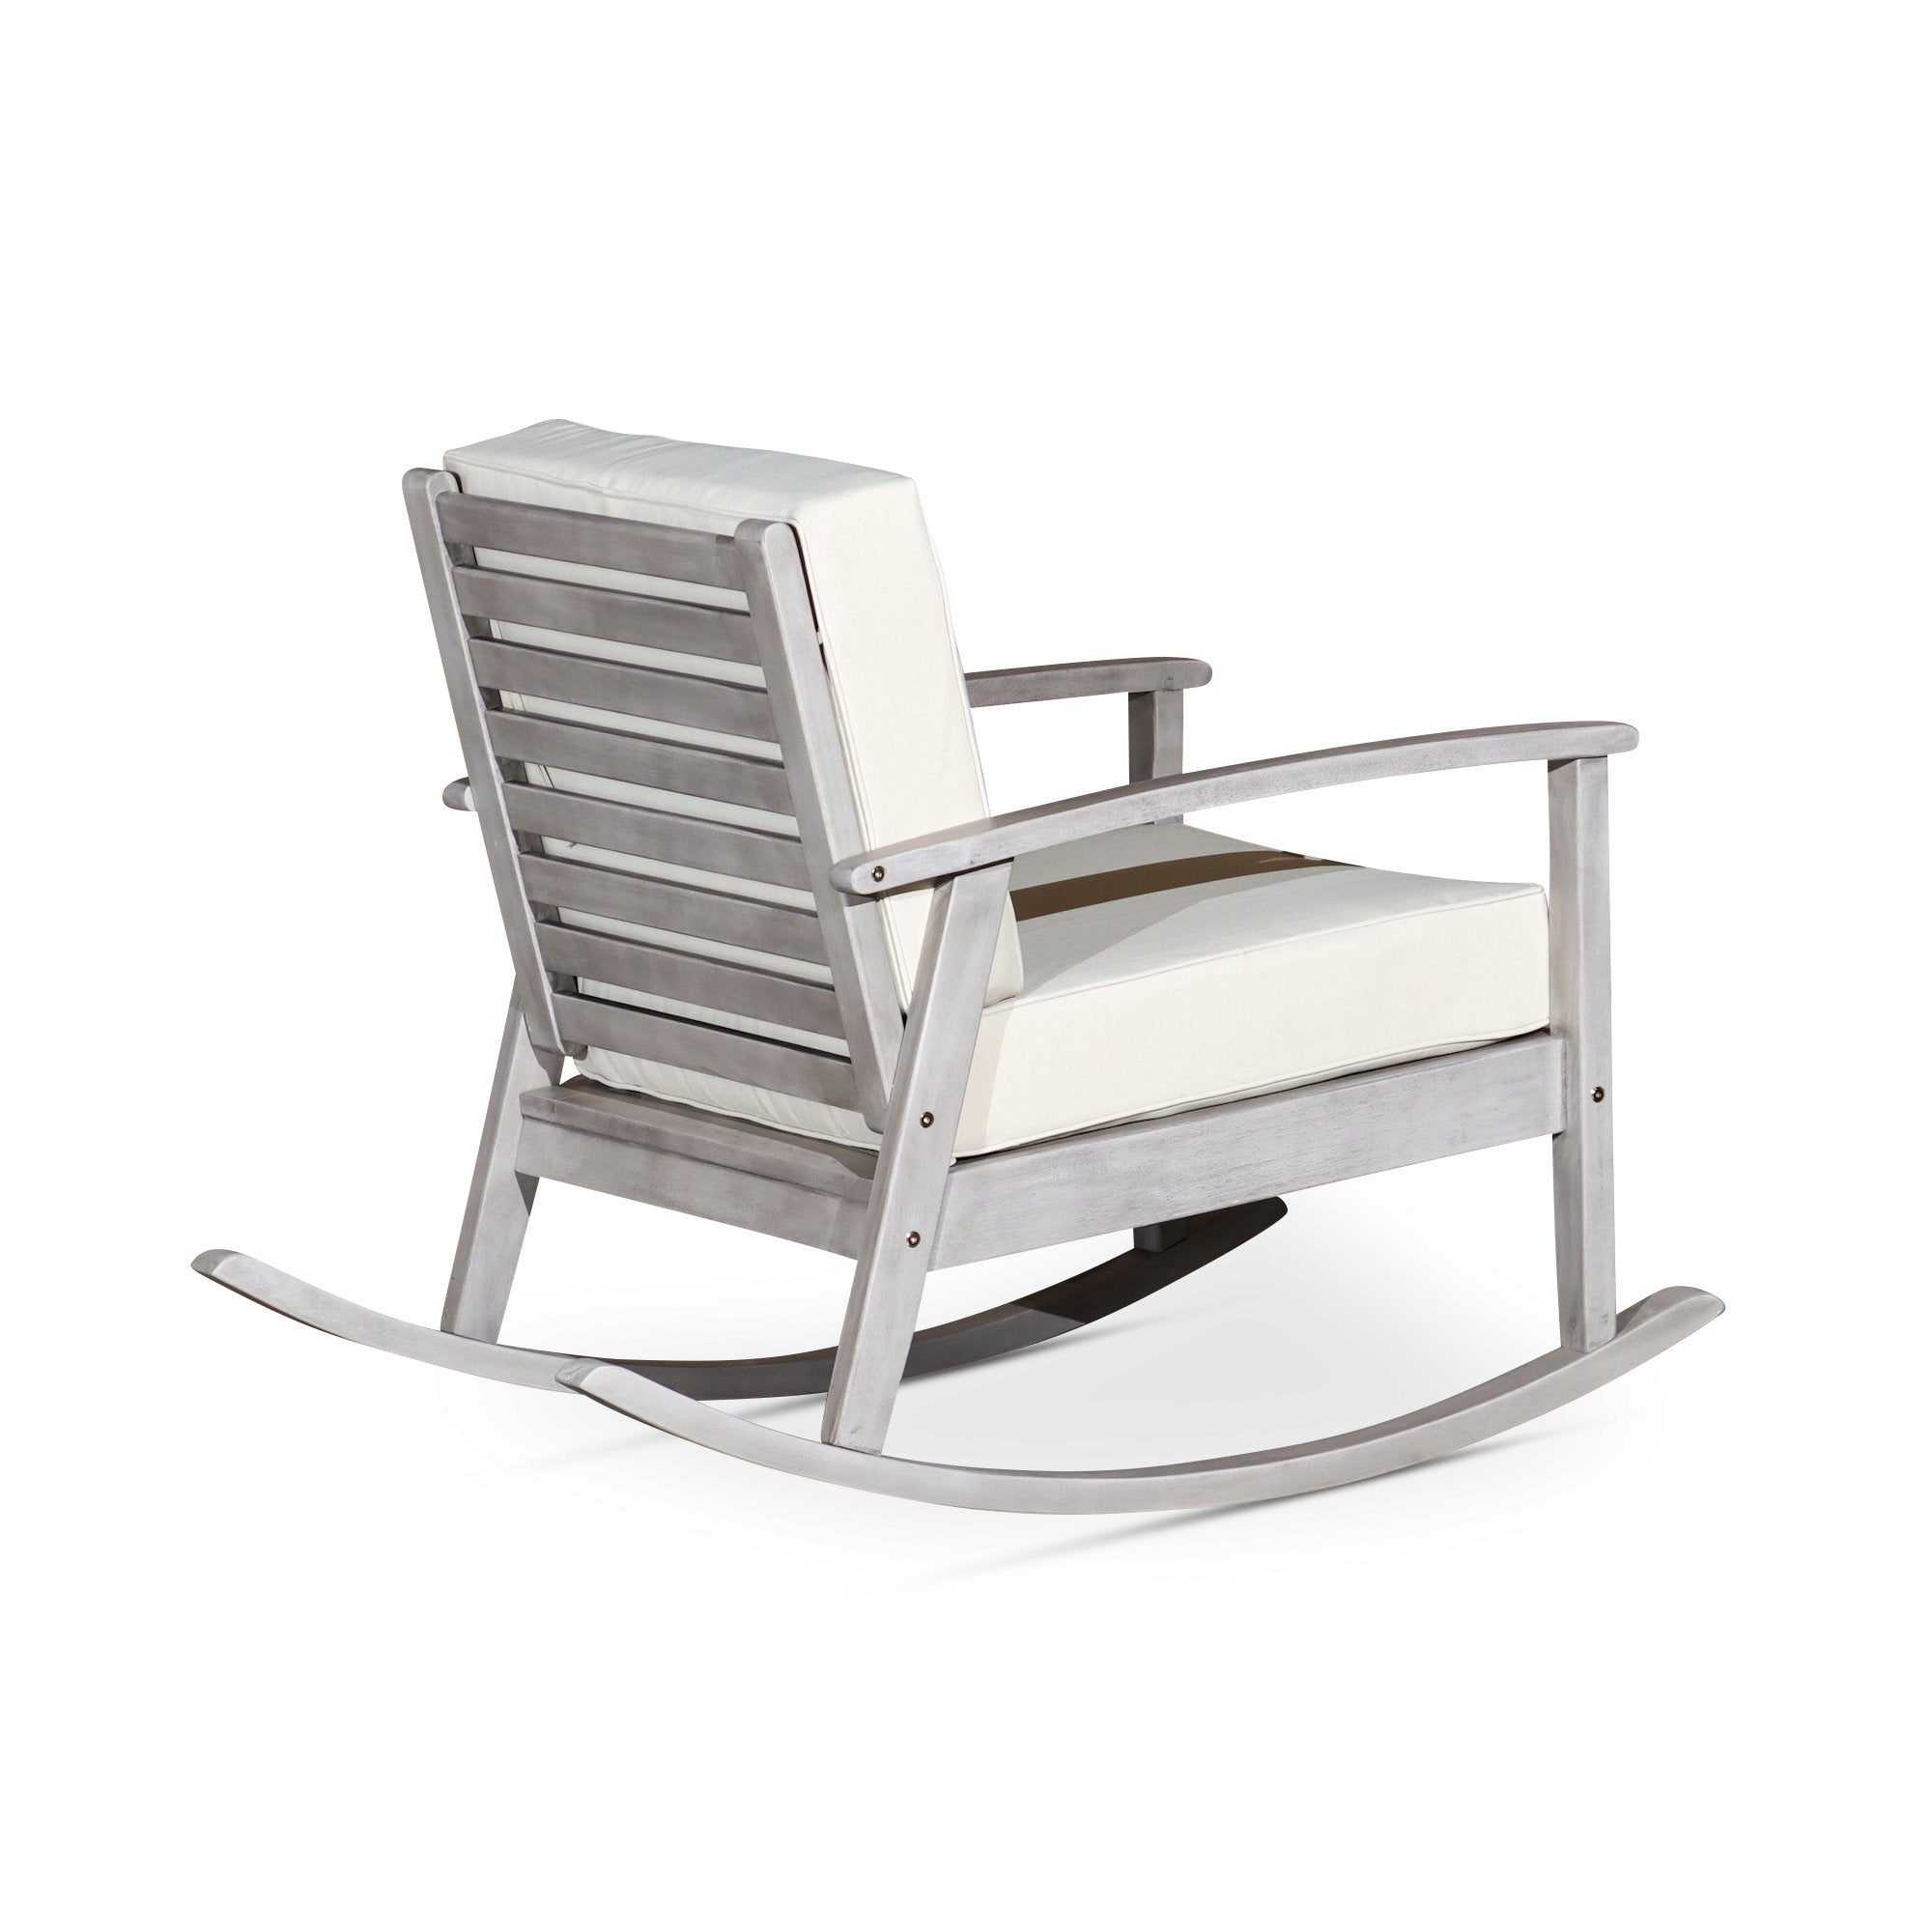 Outdoor Rocking Chair with Cushions, Silver Gray Finish, Burgundy Cushions - Tuesday Morning-Chairs & Seating